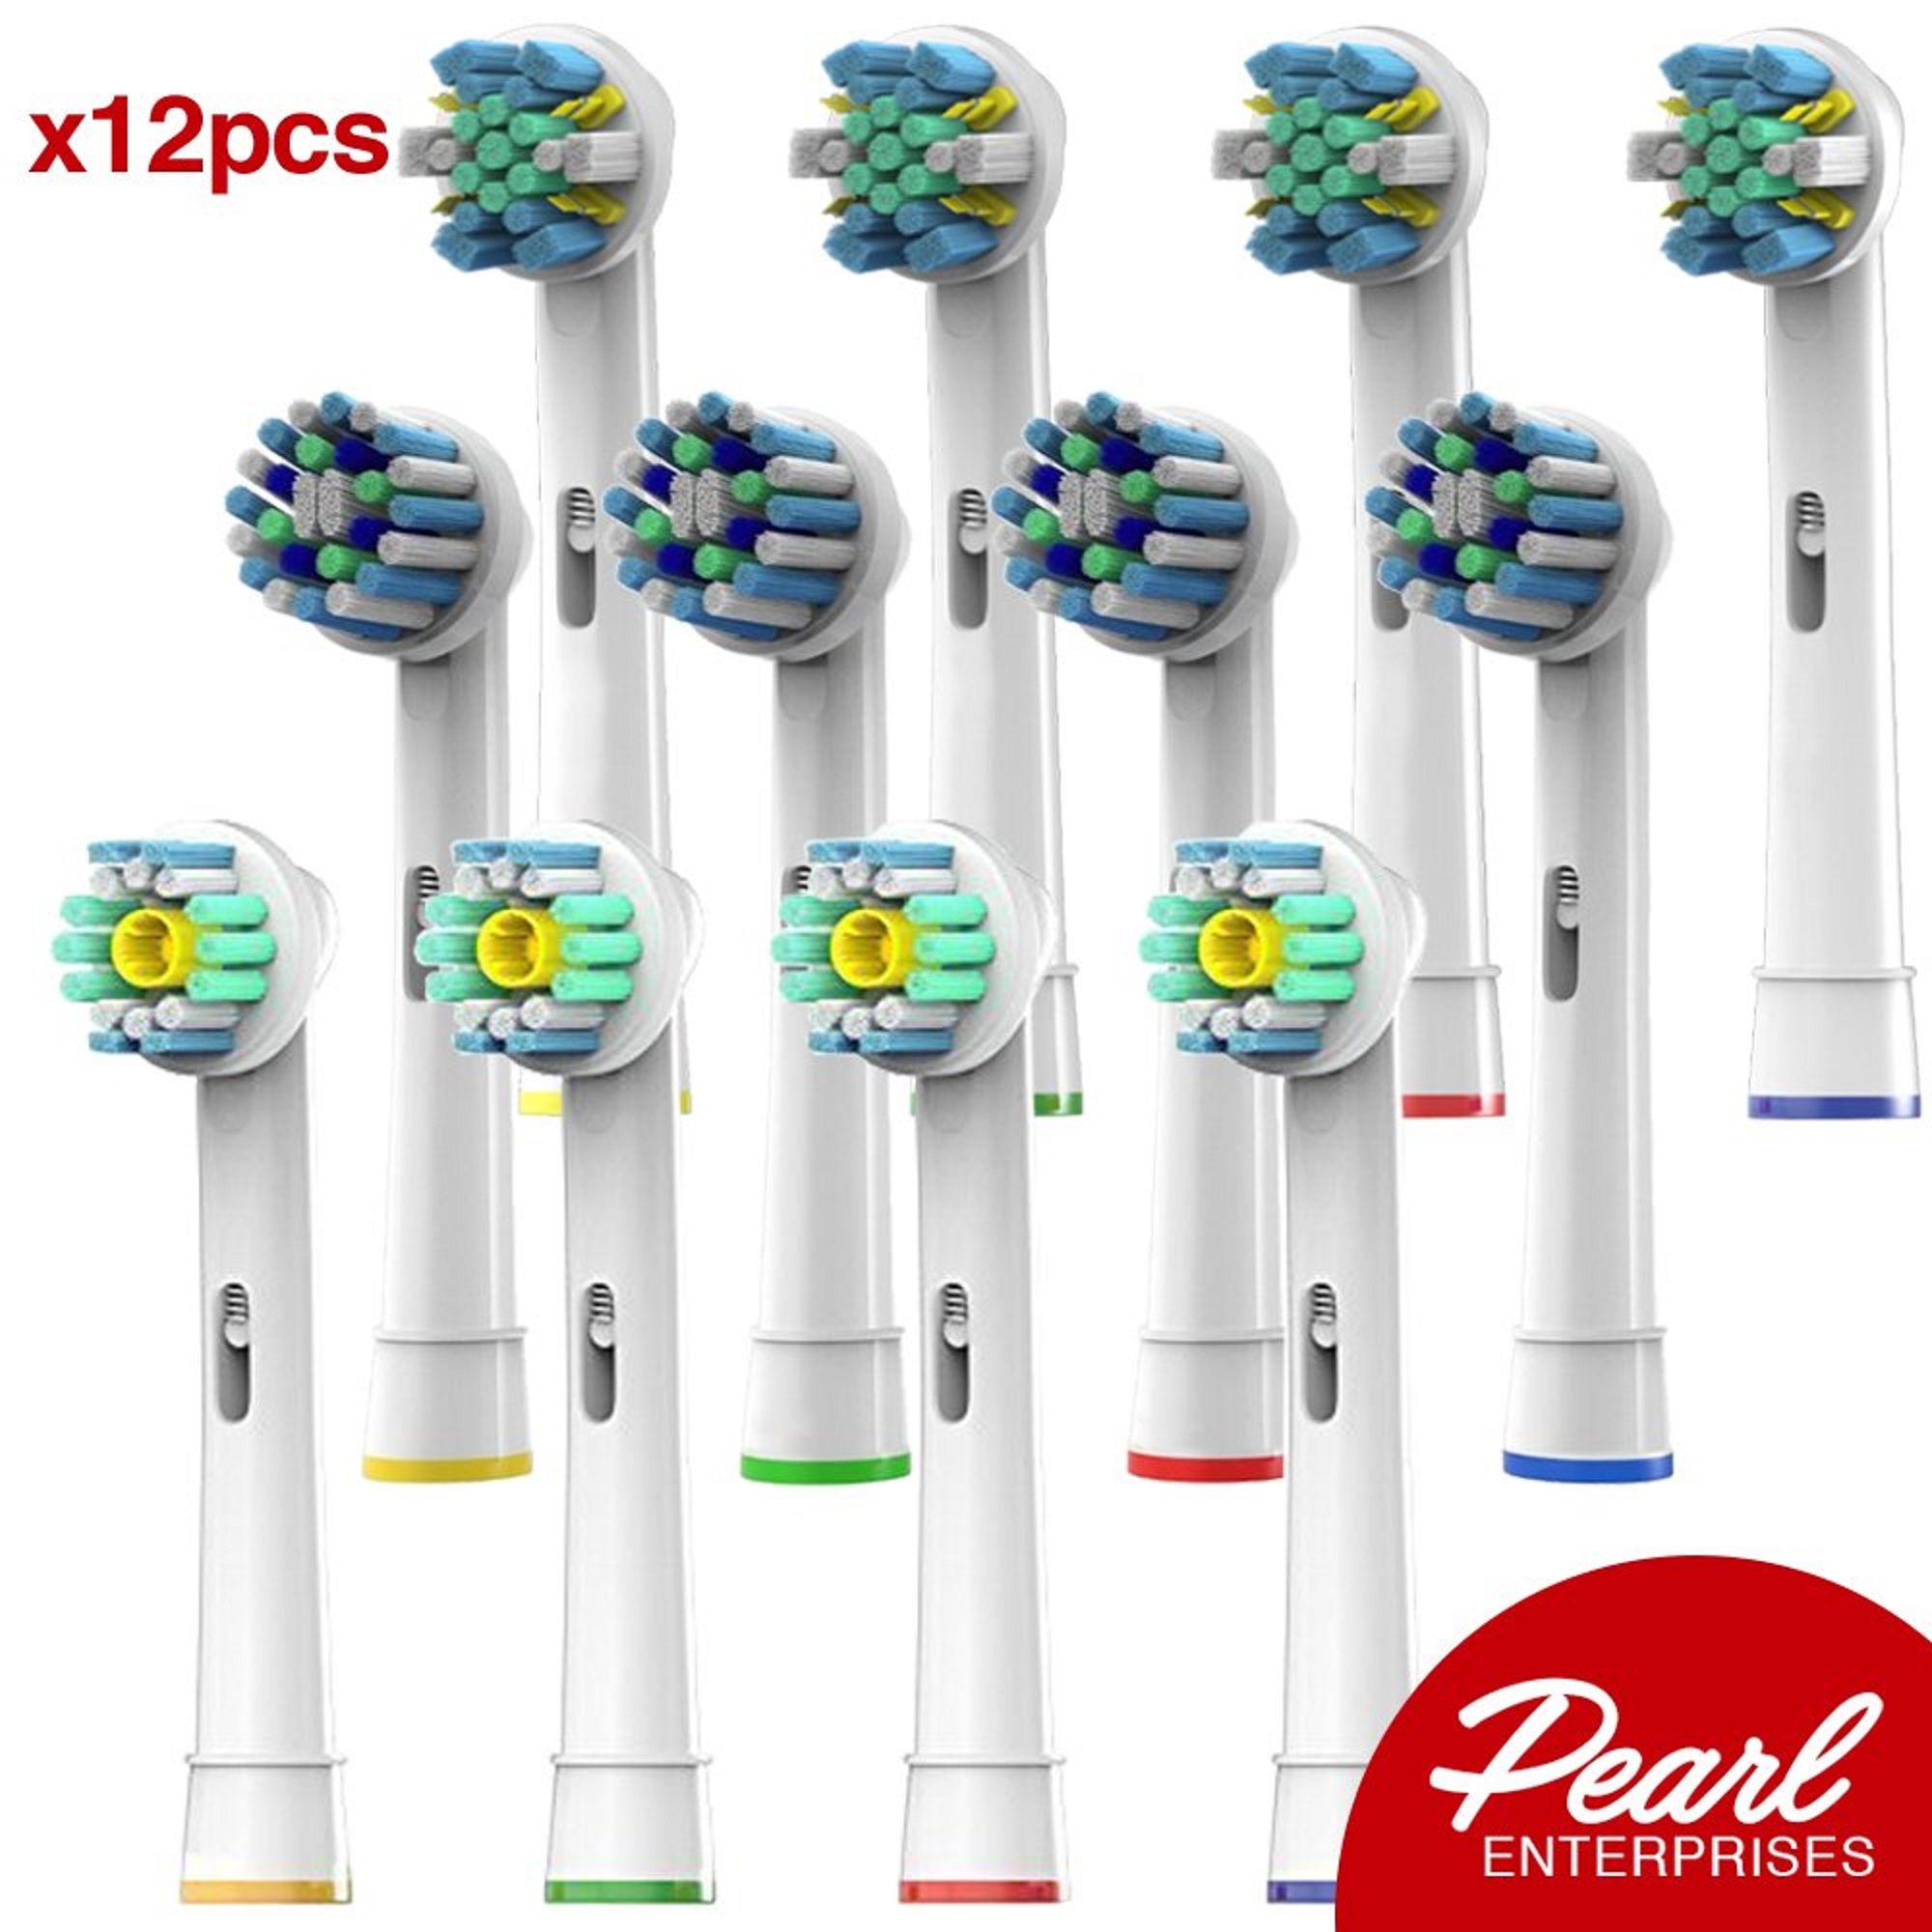 Pearl Enterprises Replacement Brush Heads Compatible With Oral B - Pack of 12 Electric Toothbrush Assorted Heads Refill Fits Oralb Braun and More - image 1 of 9